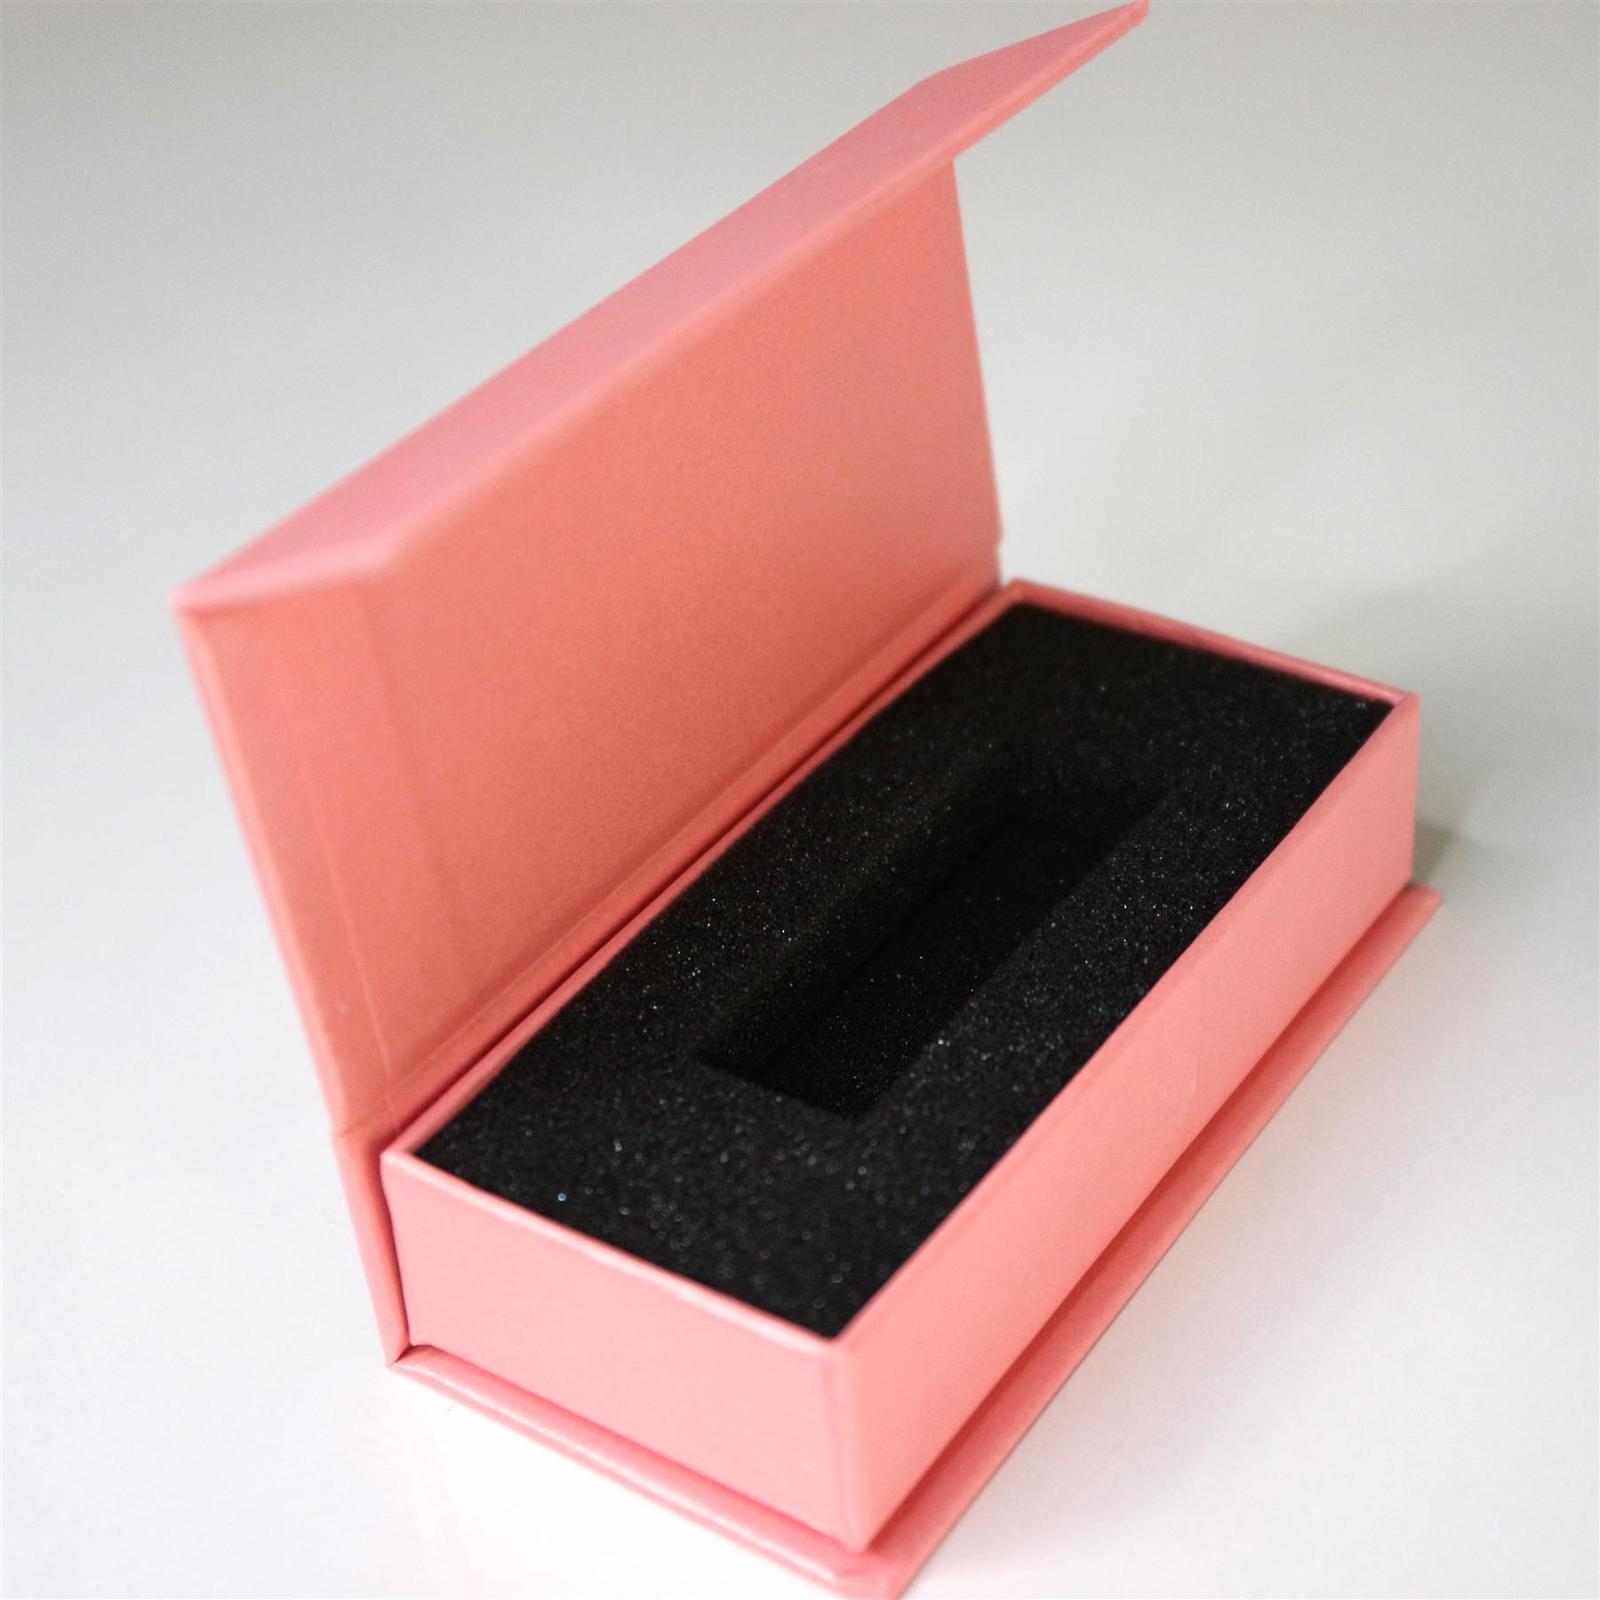 Primary image for 4x Magnetic USB Presentation Gift Boxes, Baby Pink, flash drives